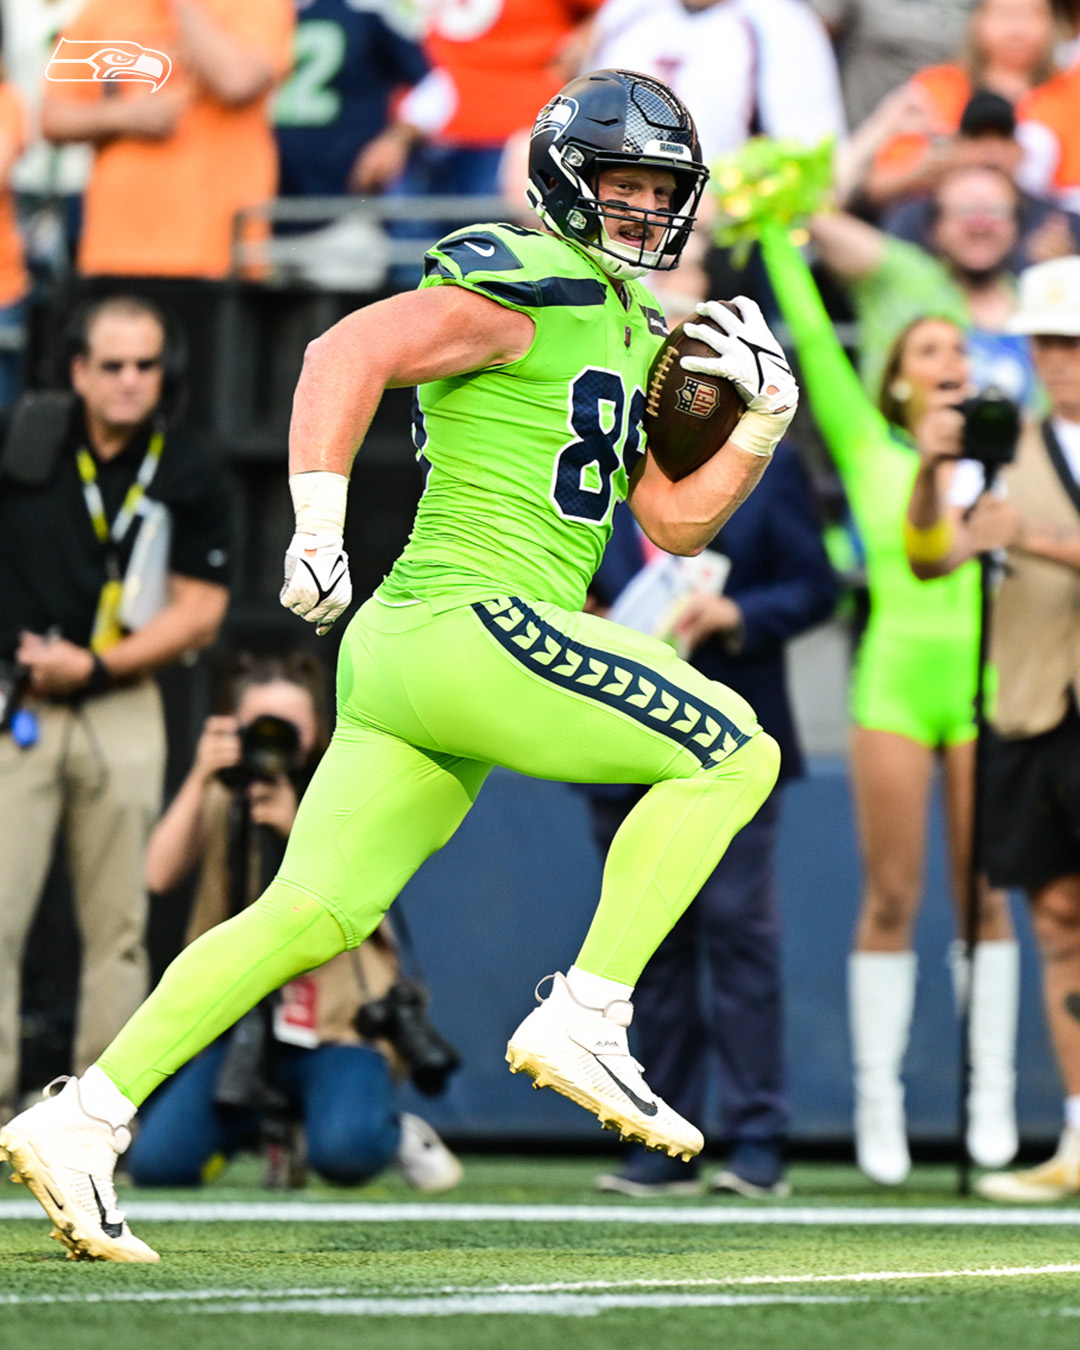 Seattle Seahawks 'Color Rush' Uniforms Are Bright Green